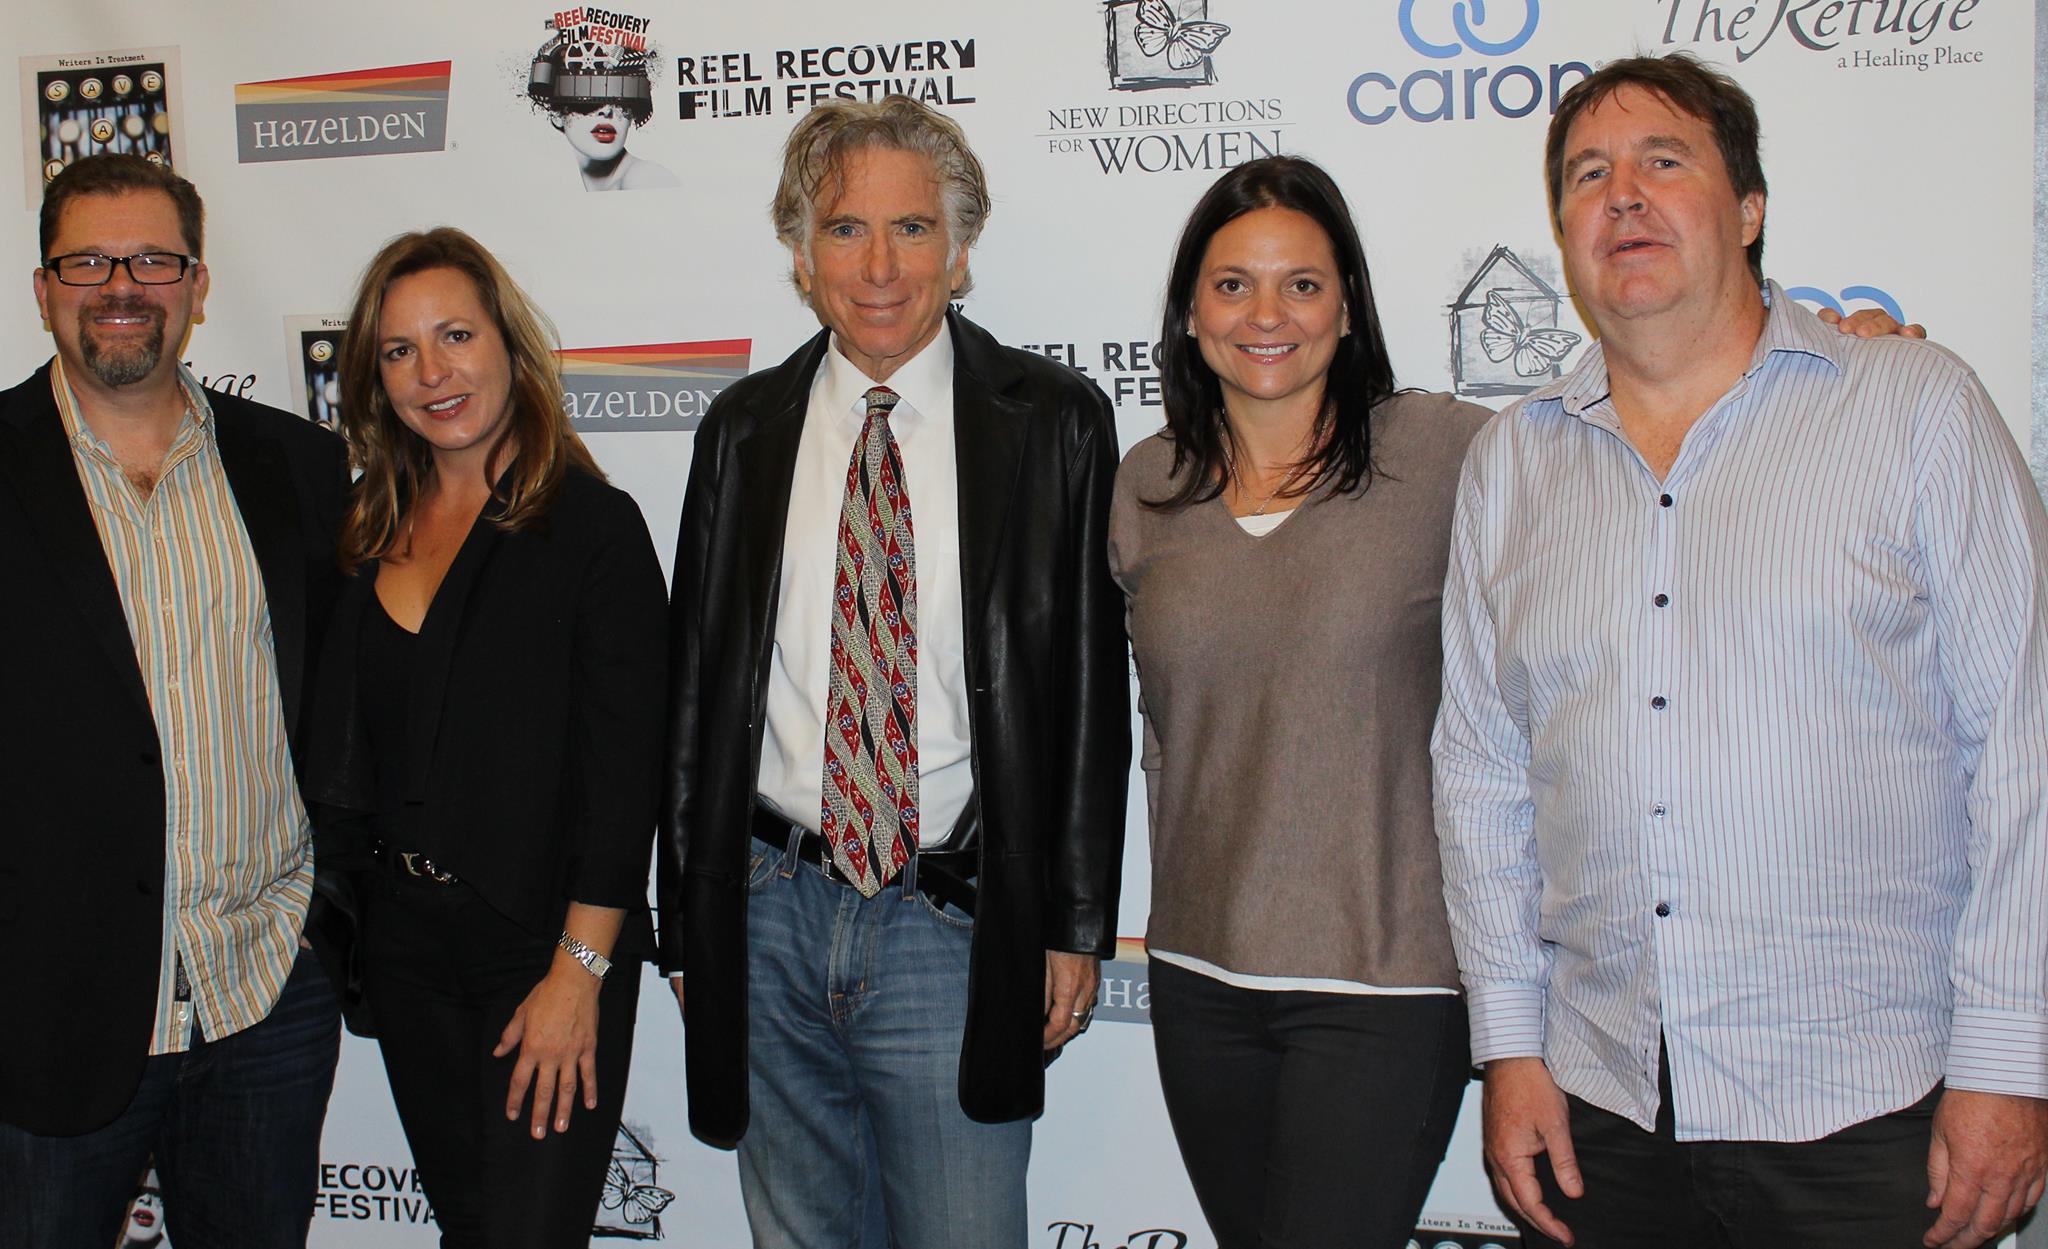 The Reel Recovery Film Festival NYC 2013